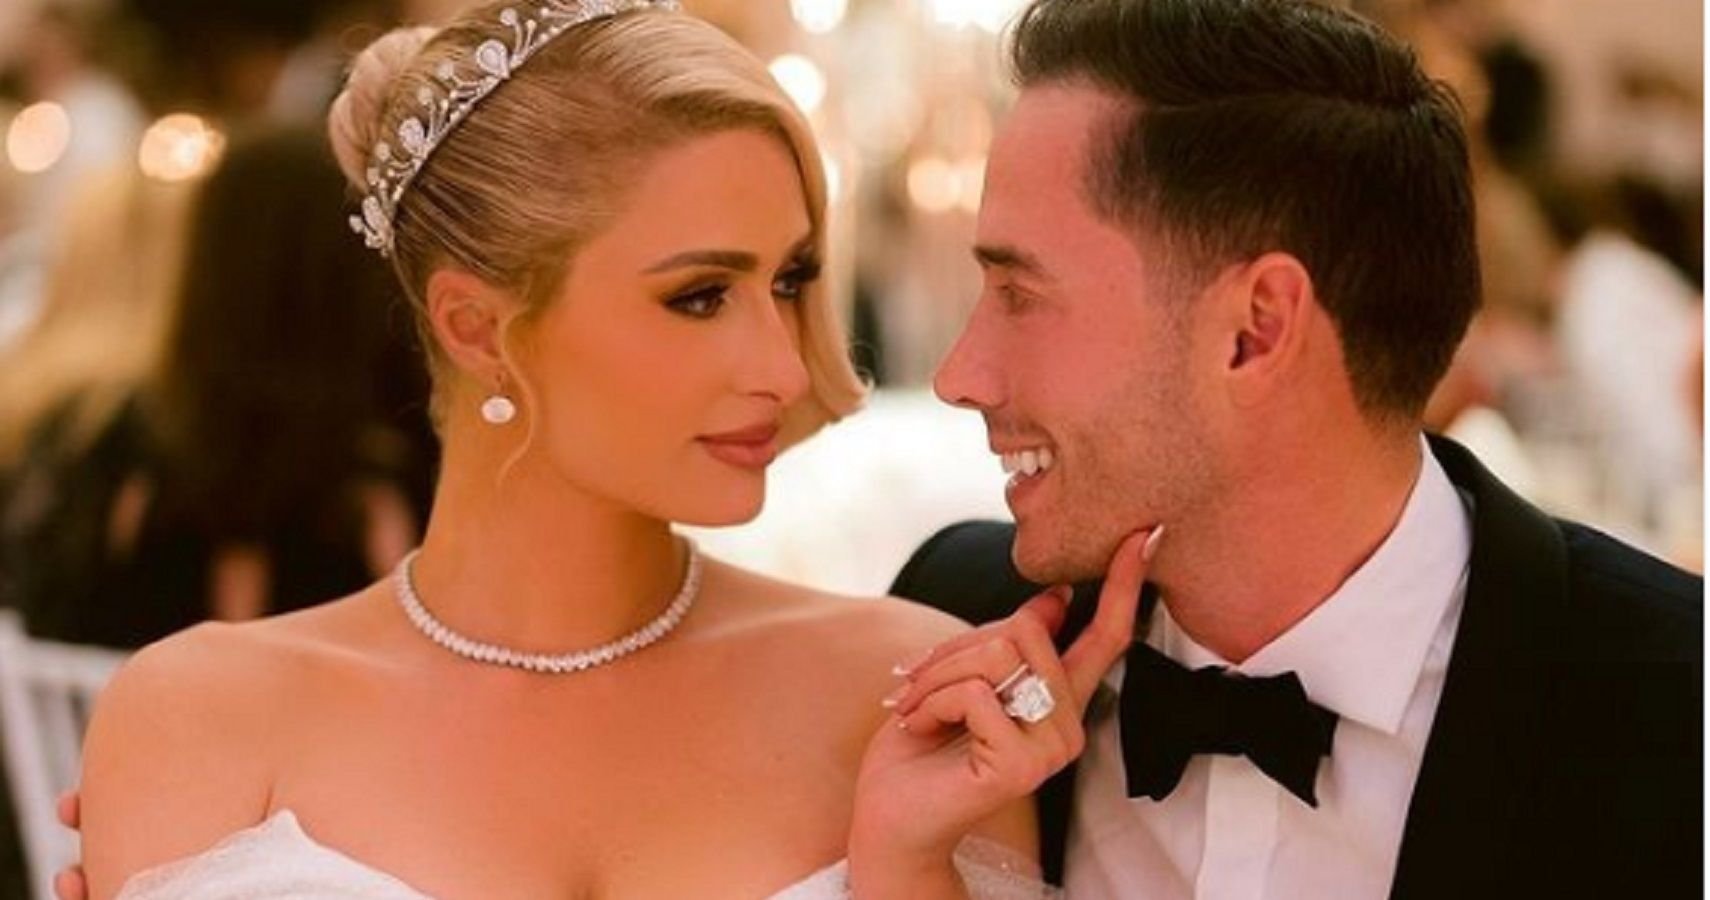 A Glance At The Extravagant Wedding Of Paris Hilton And Carter Reum